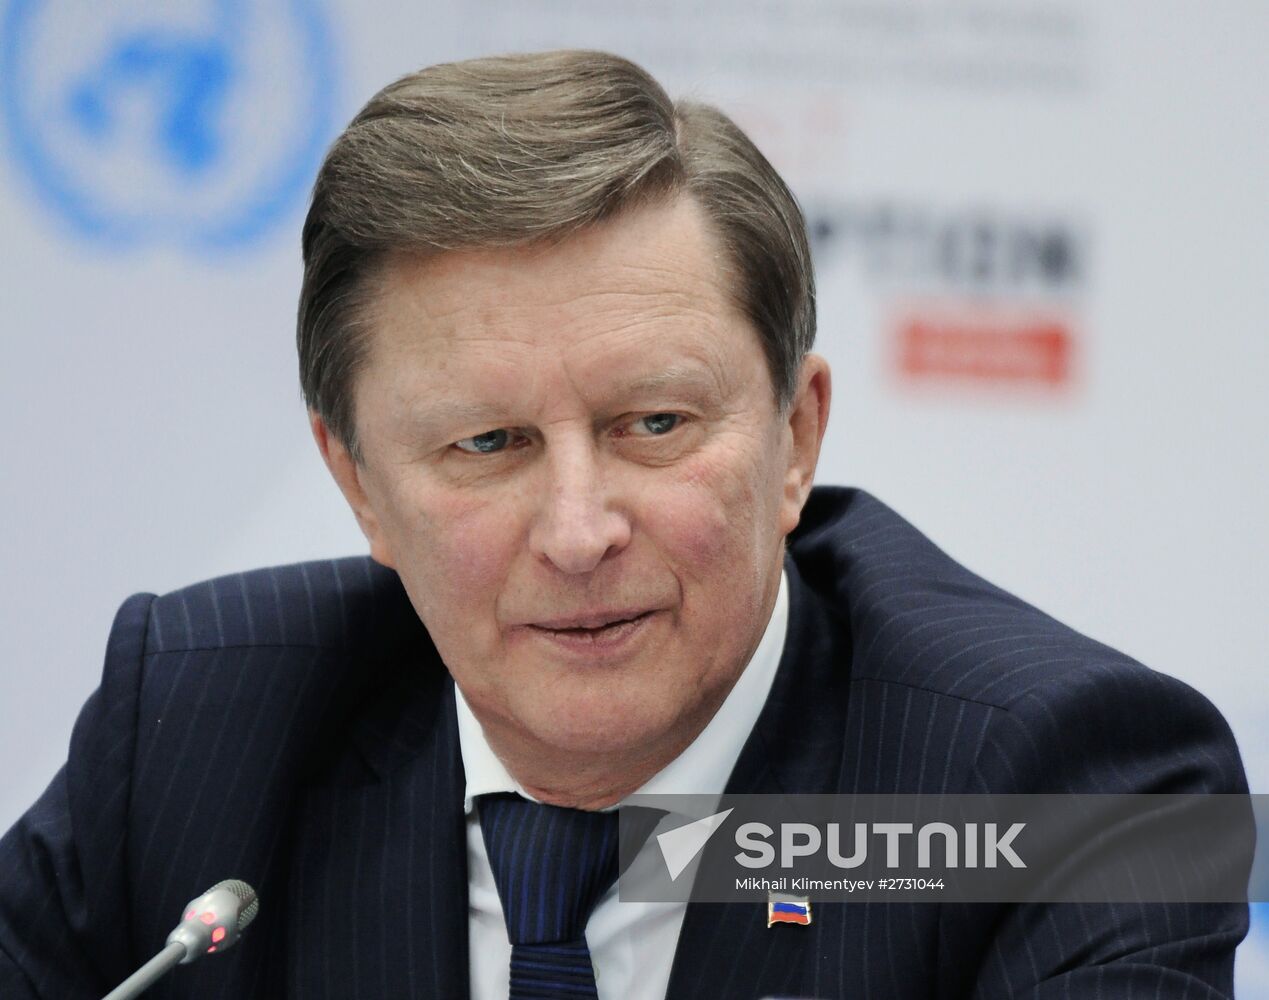 Russian Presidential Chief of Staff Sergei Ivanov visits North-Western Federal District